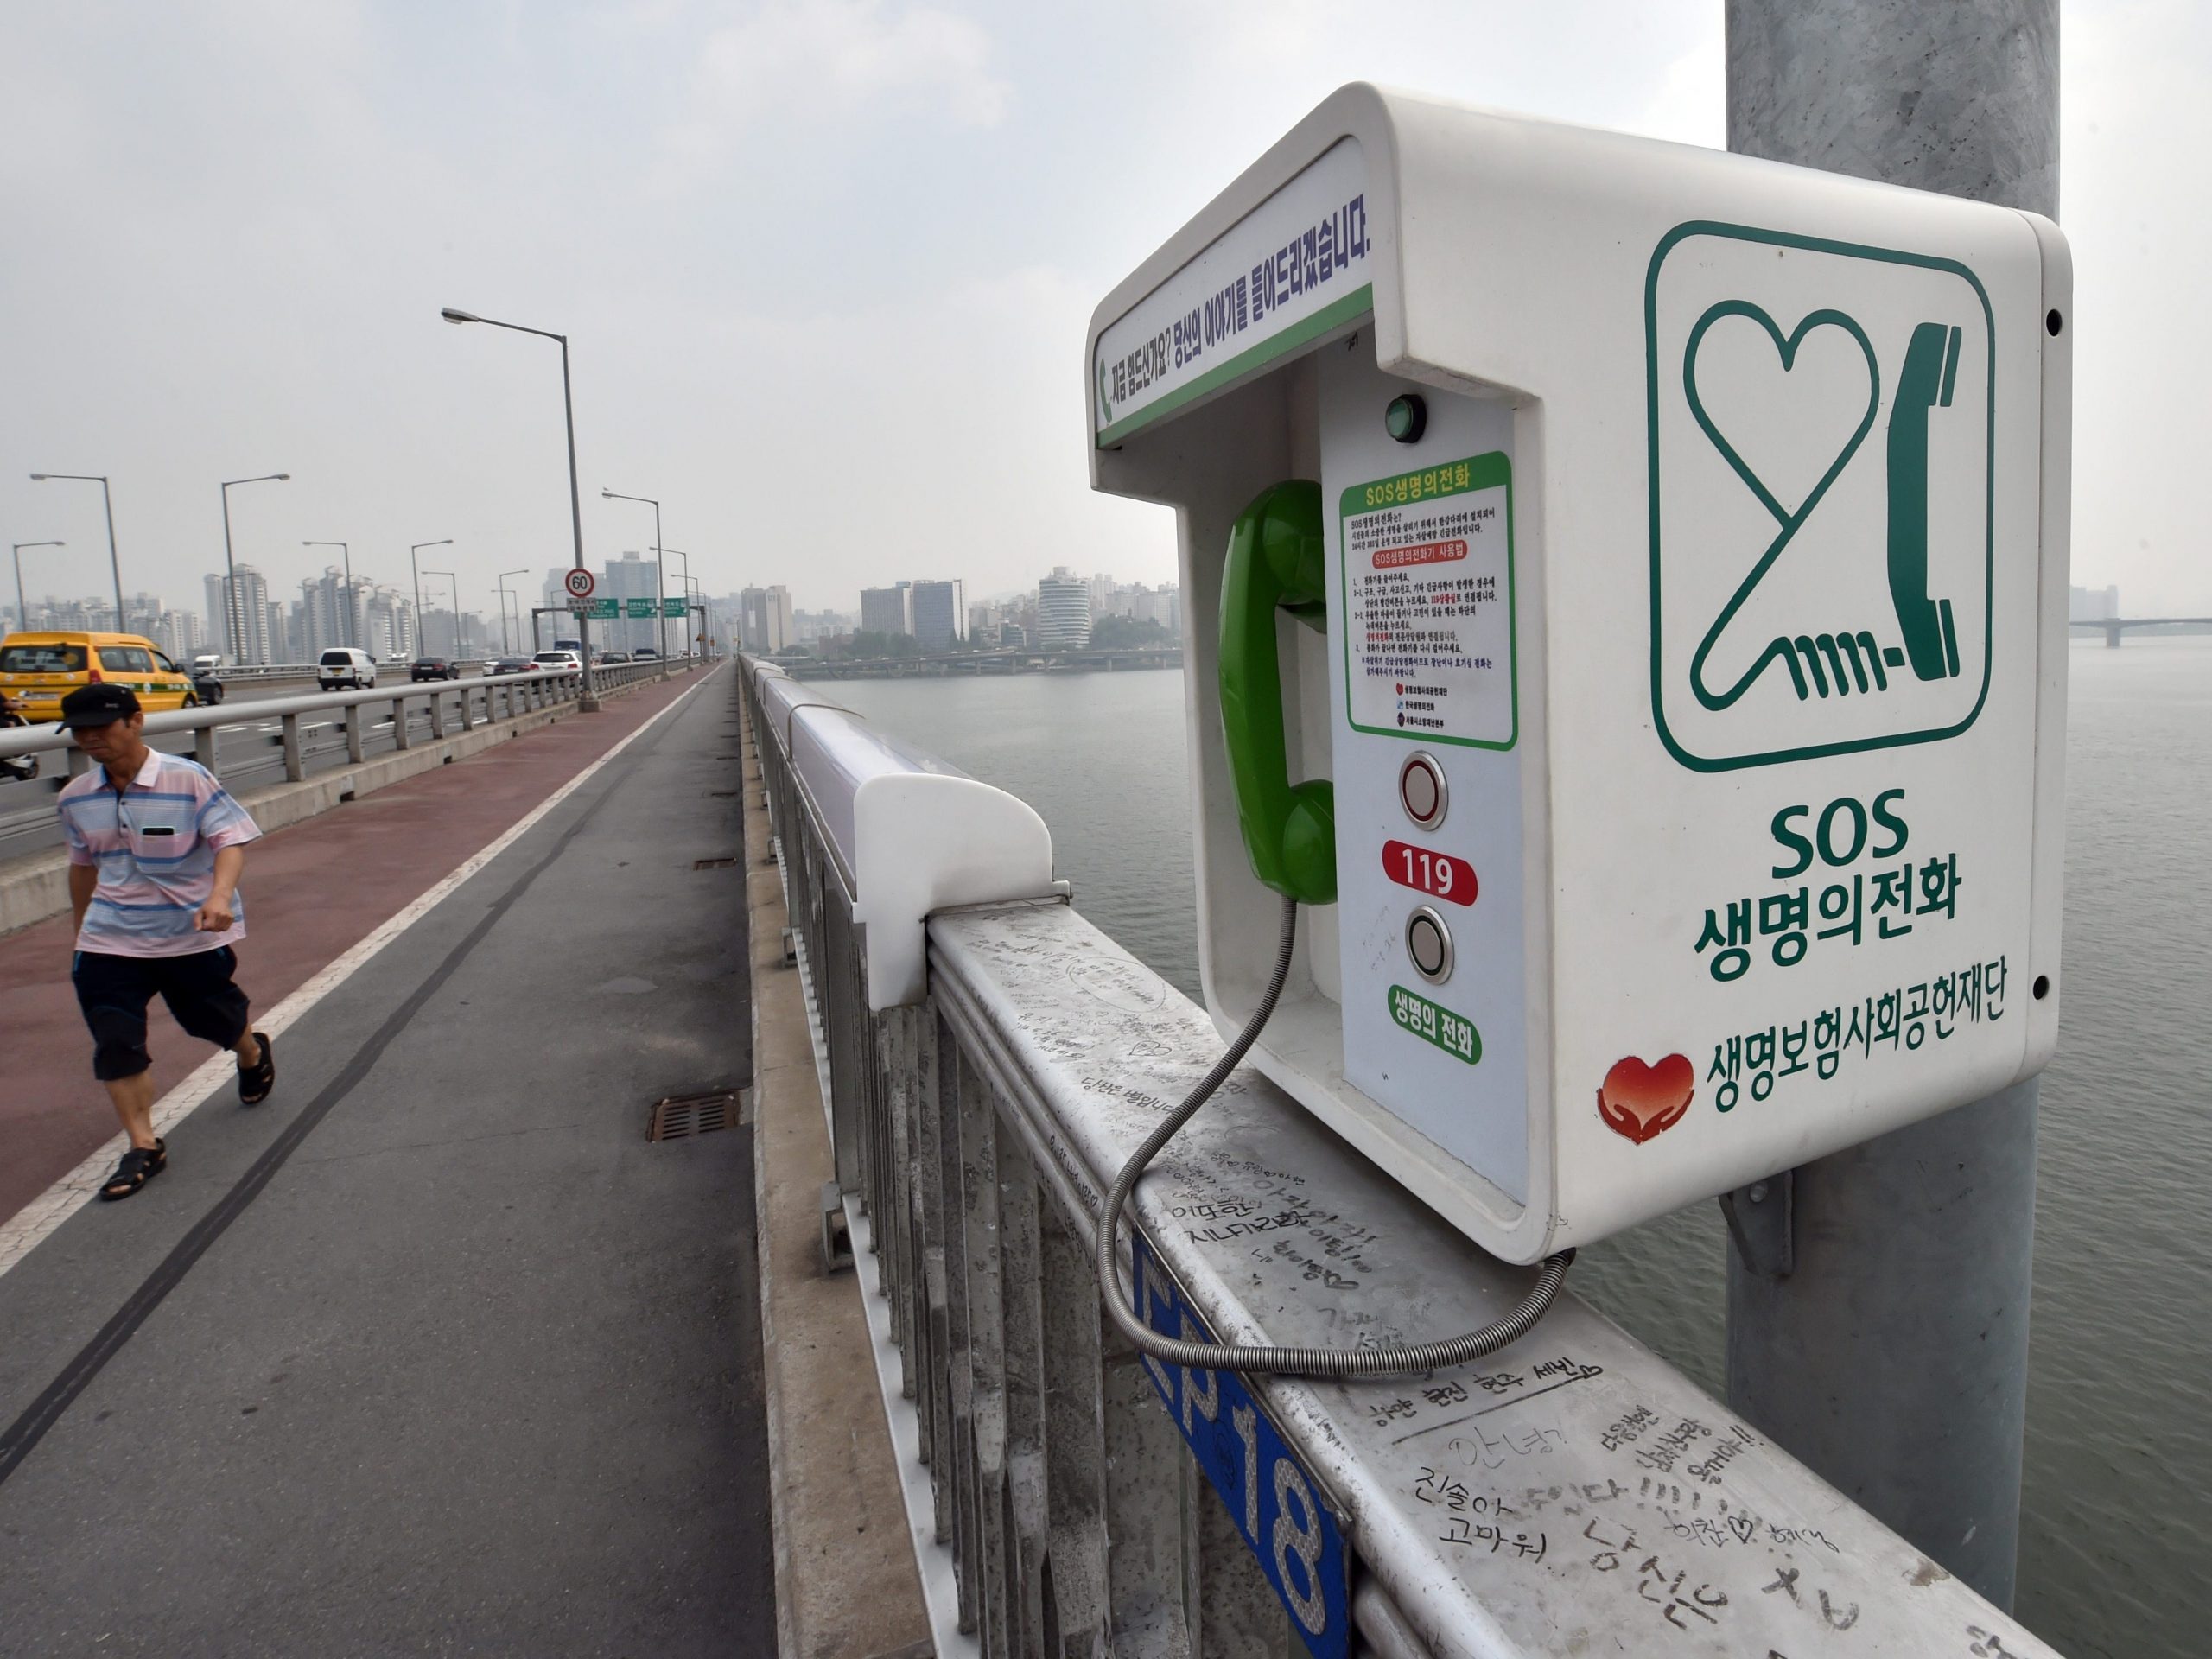 A man walks past an emergency telephone on Mapo Bridge, a common site for suicides, over the Han river in Seoul on July 14, 2014.